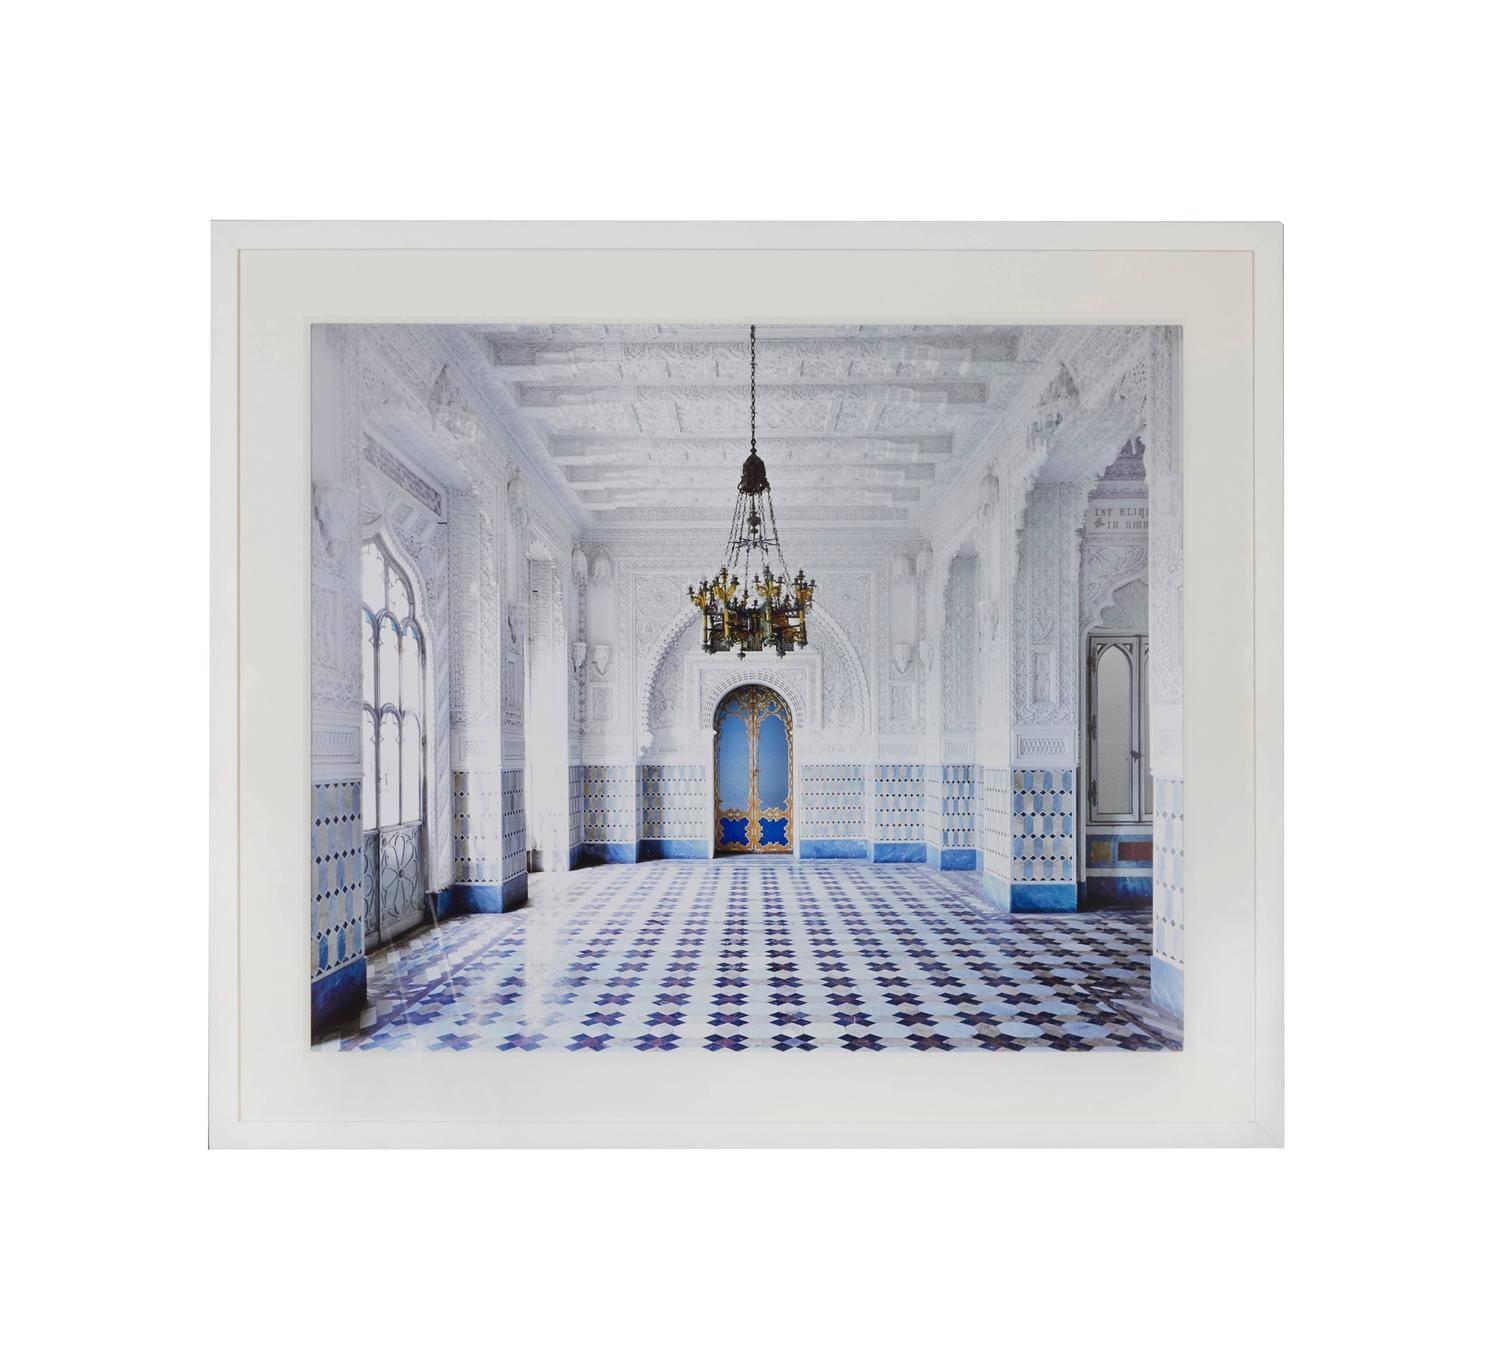 Palazzo di Ostankino, Mosca, 2015
Chromogenic print
Edition of 5
Signed, dated, and numbered on verso label   

39.5 x 47.5 inches edition of 5  
47.5 x 59 inches edition of 5  
71 x 88.5 inches edition of 5   

Florentine photographer Massimo